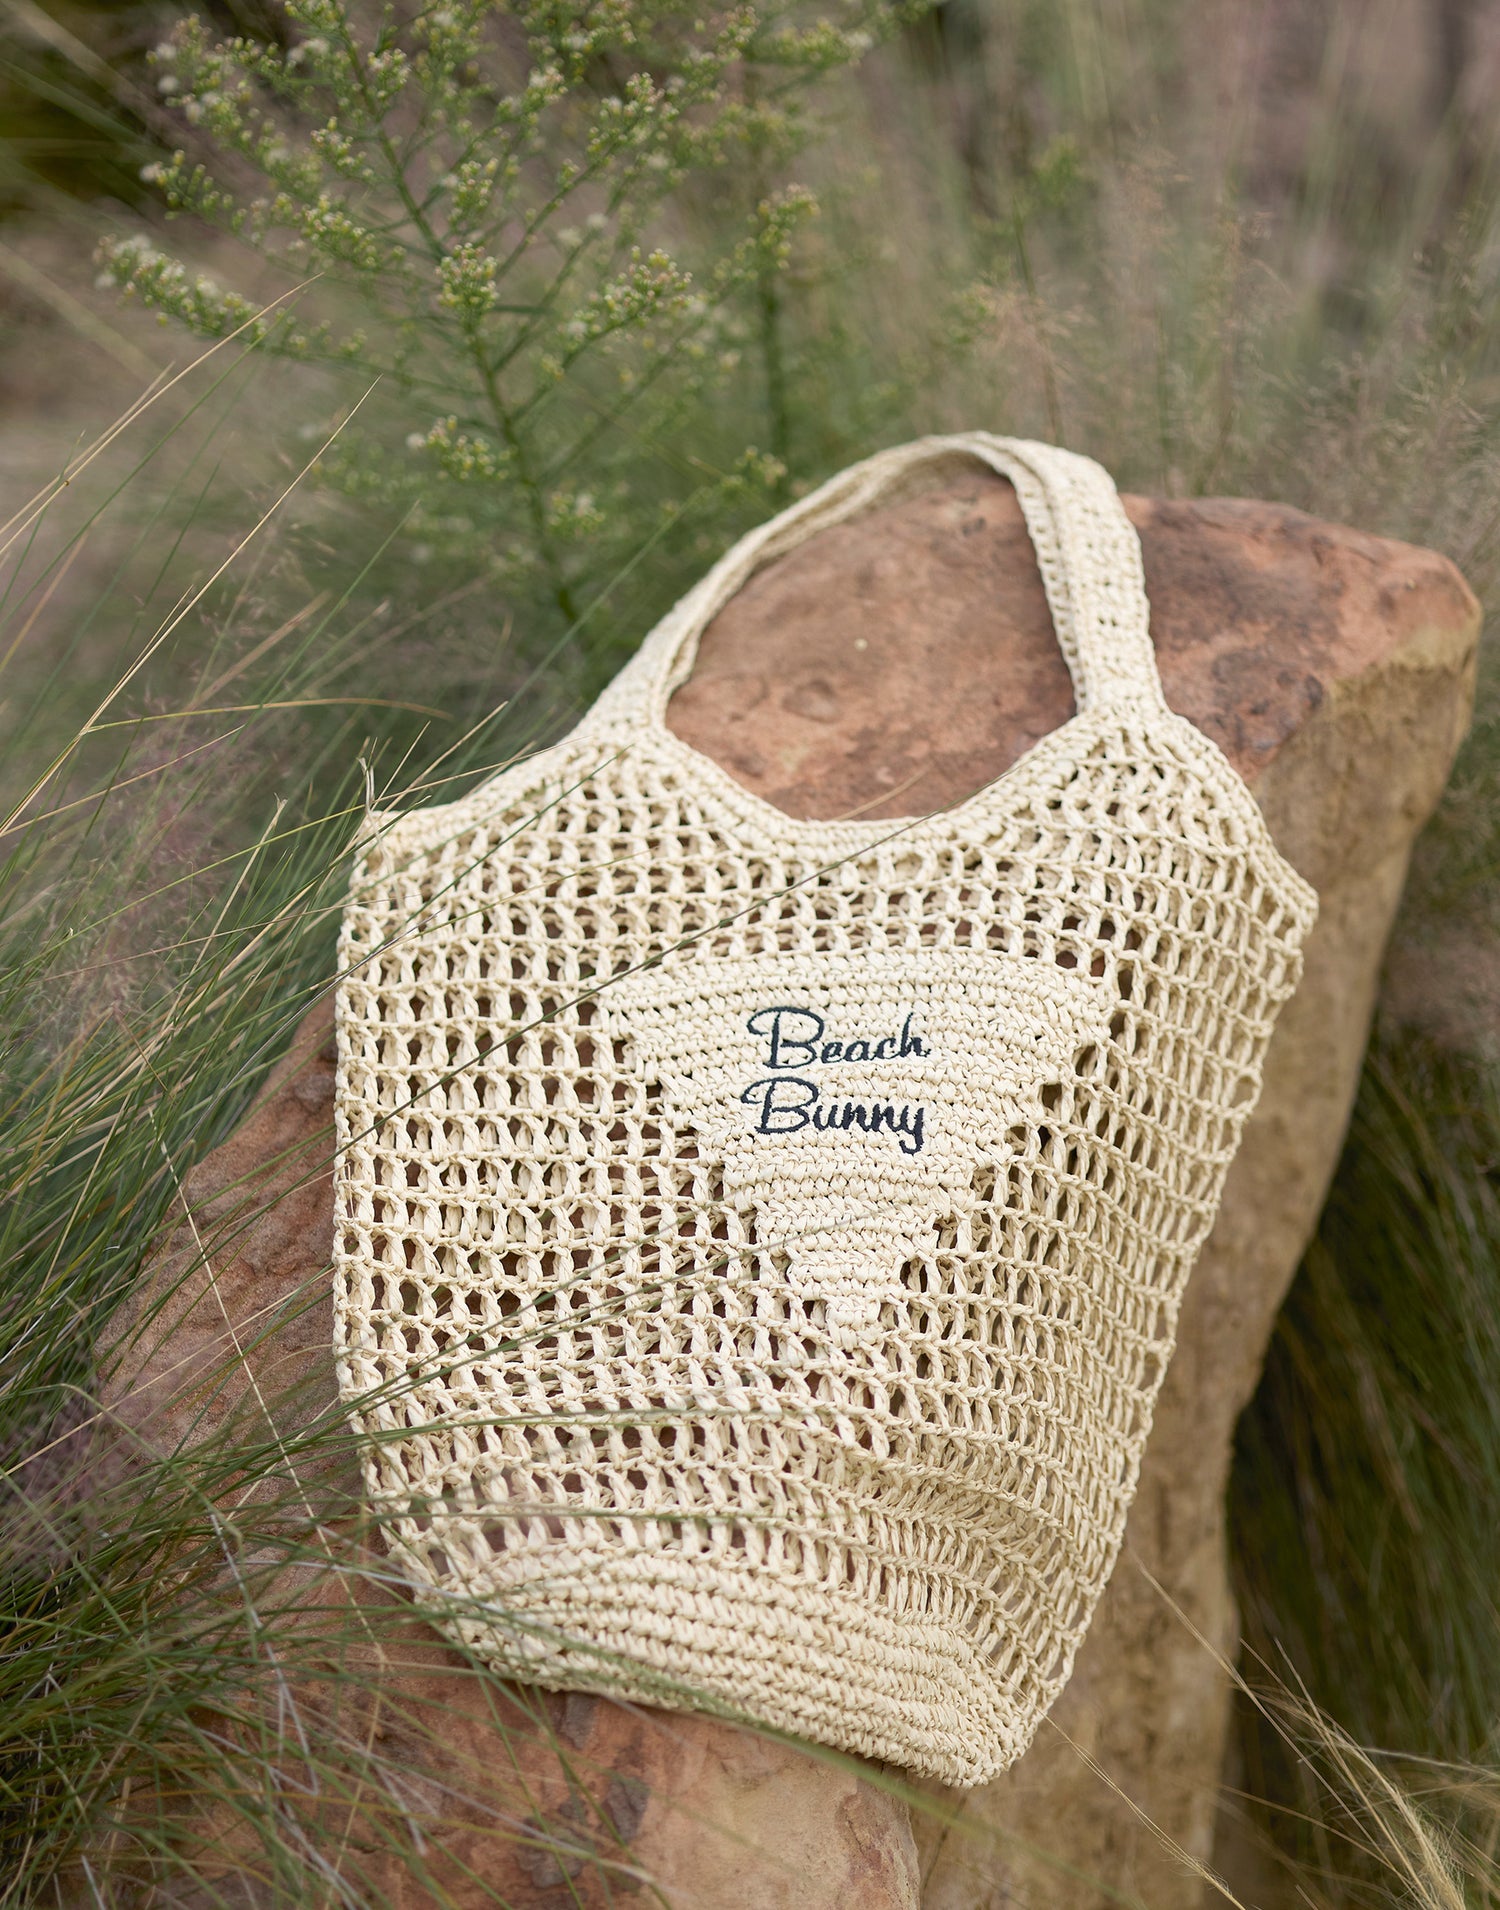 Beach Bunny Bag in Natural - Alternate Product View